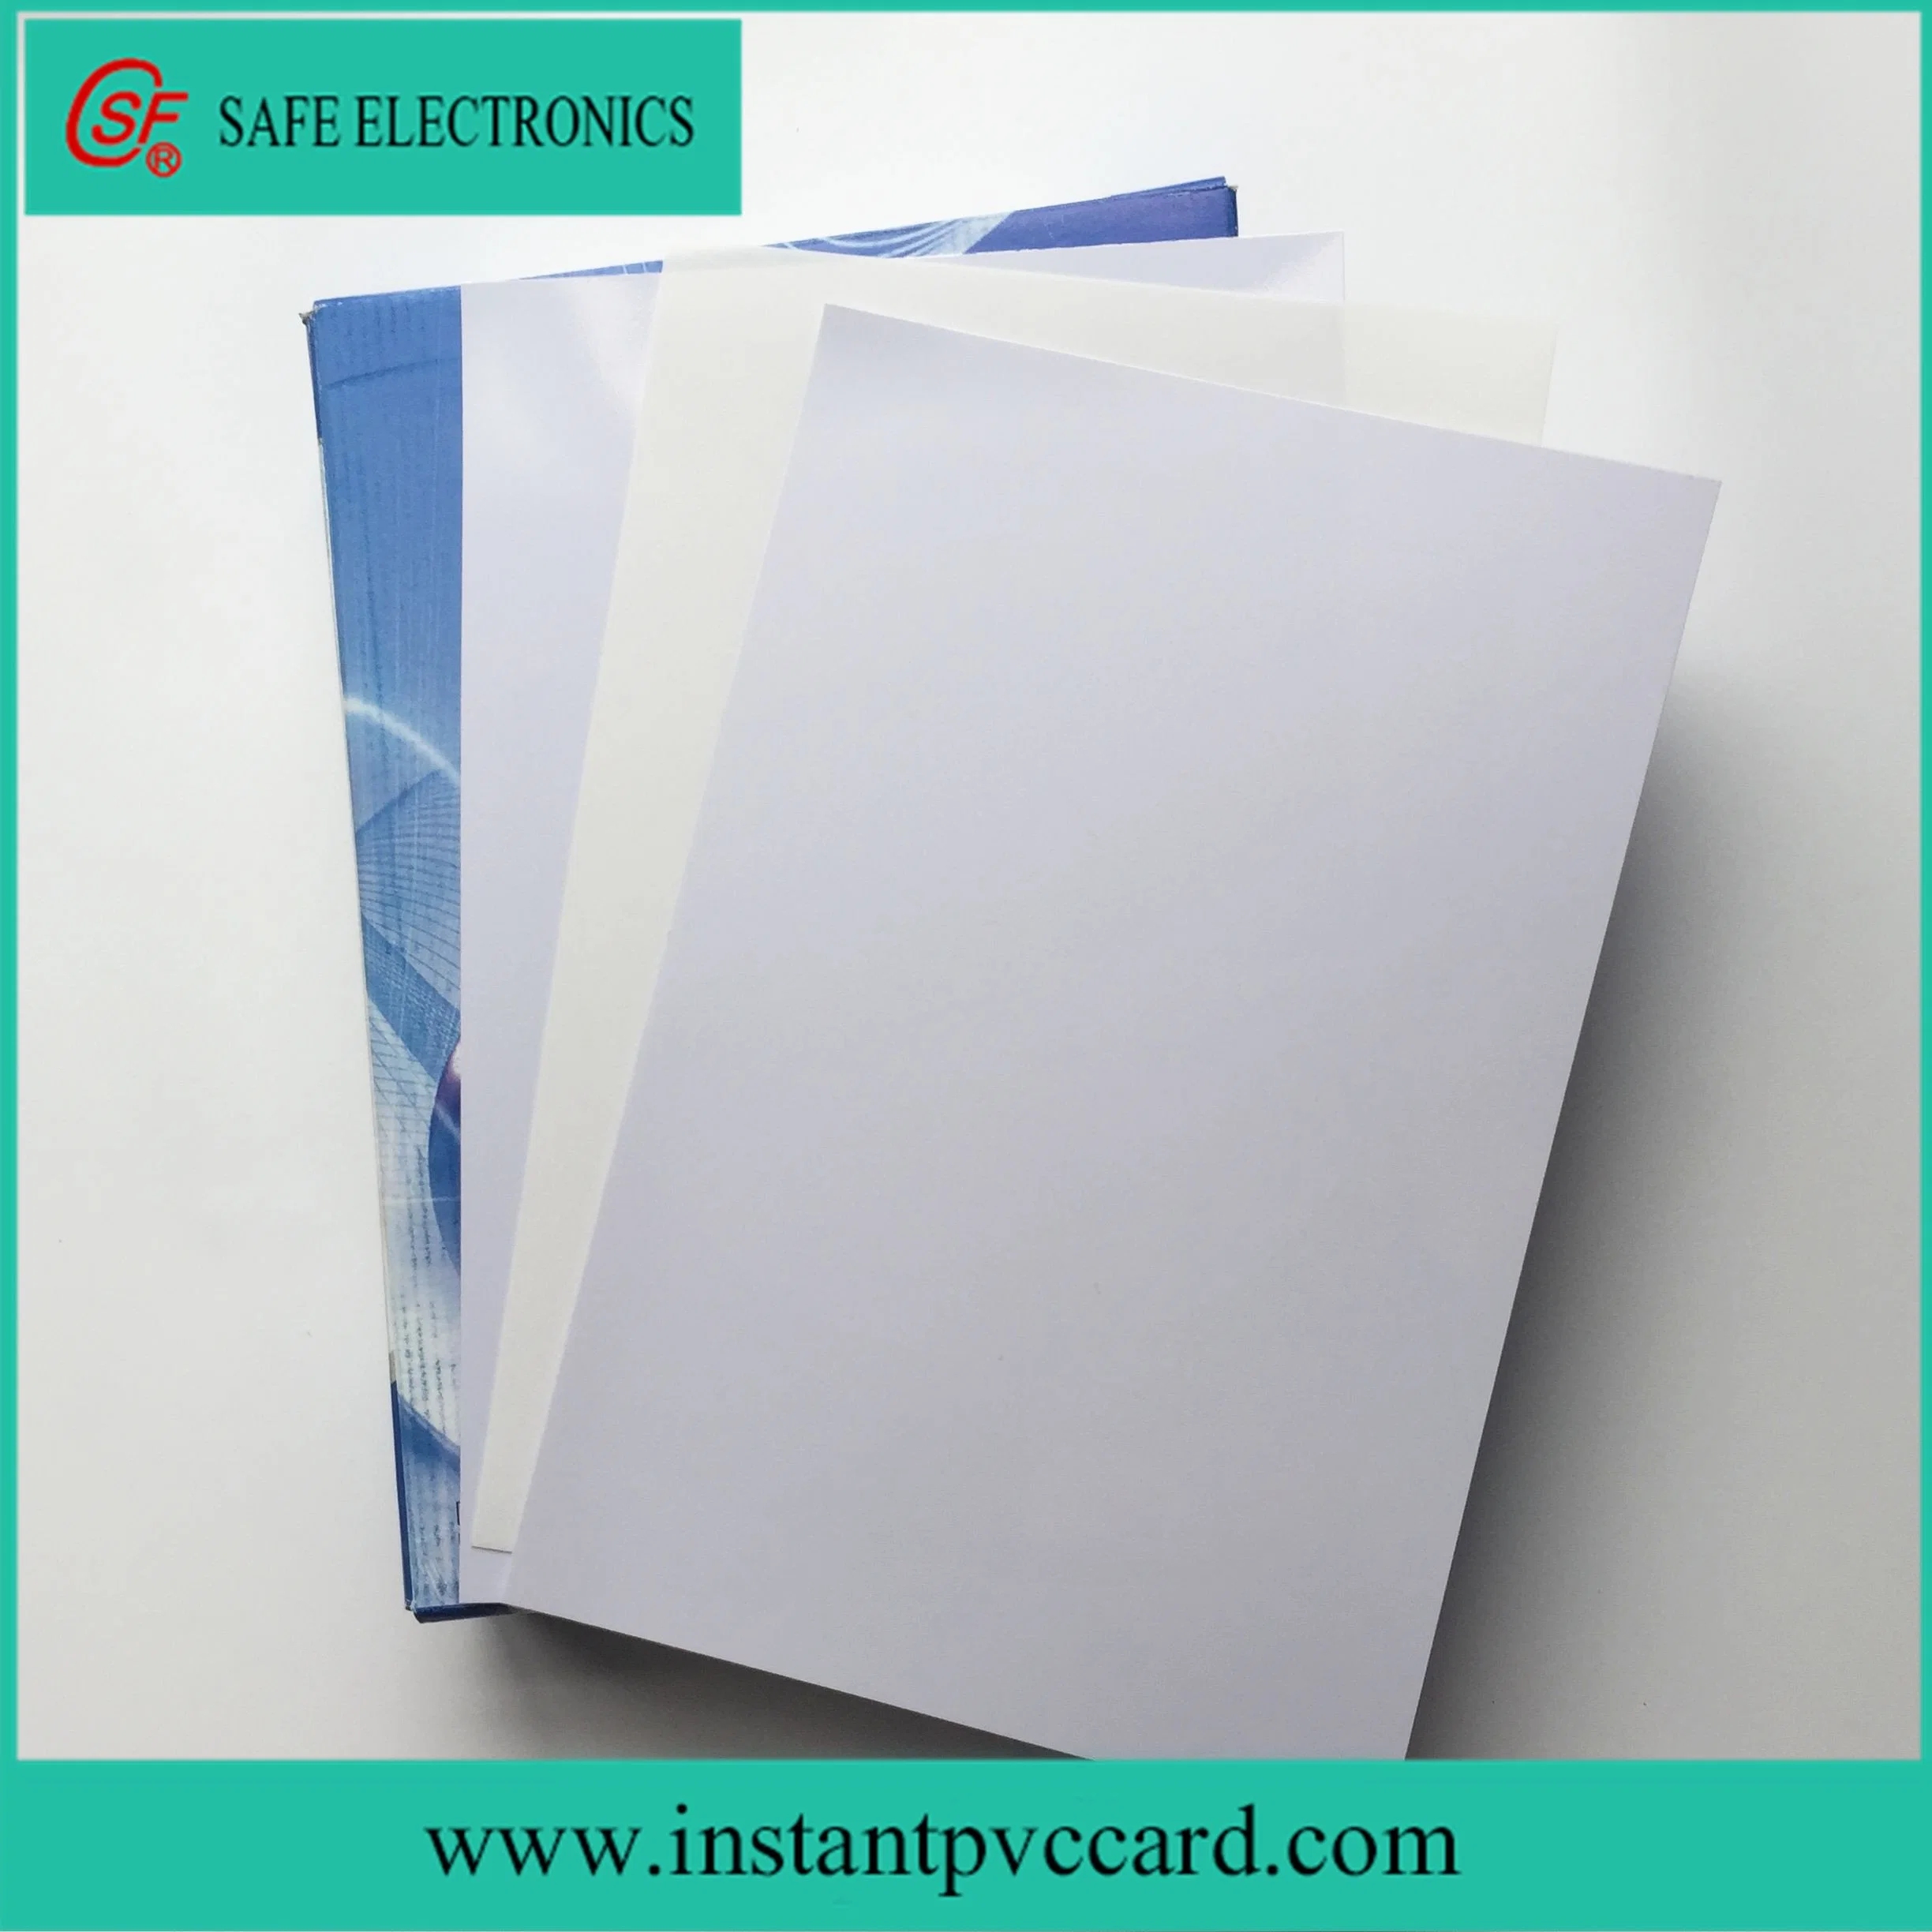 for Epson or Canon Inkjet Printer PVC Card Material with Stiffness Features